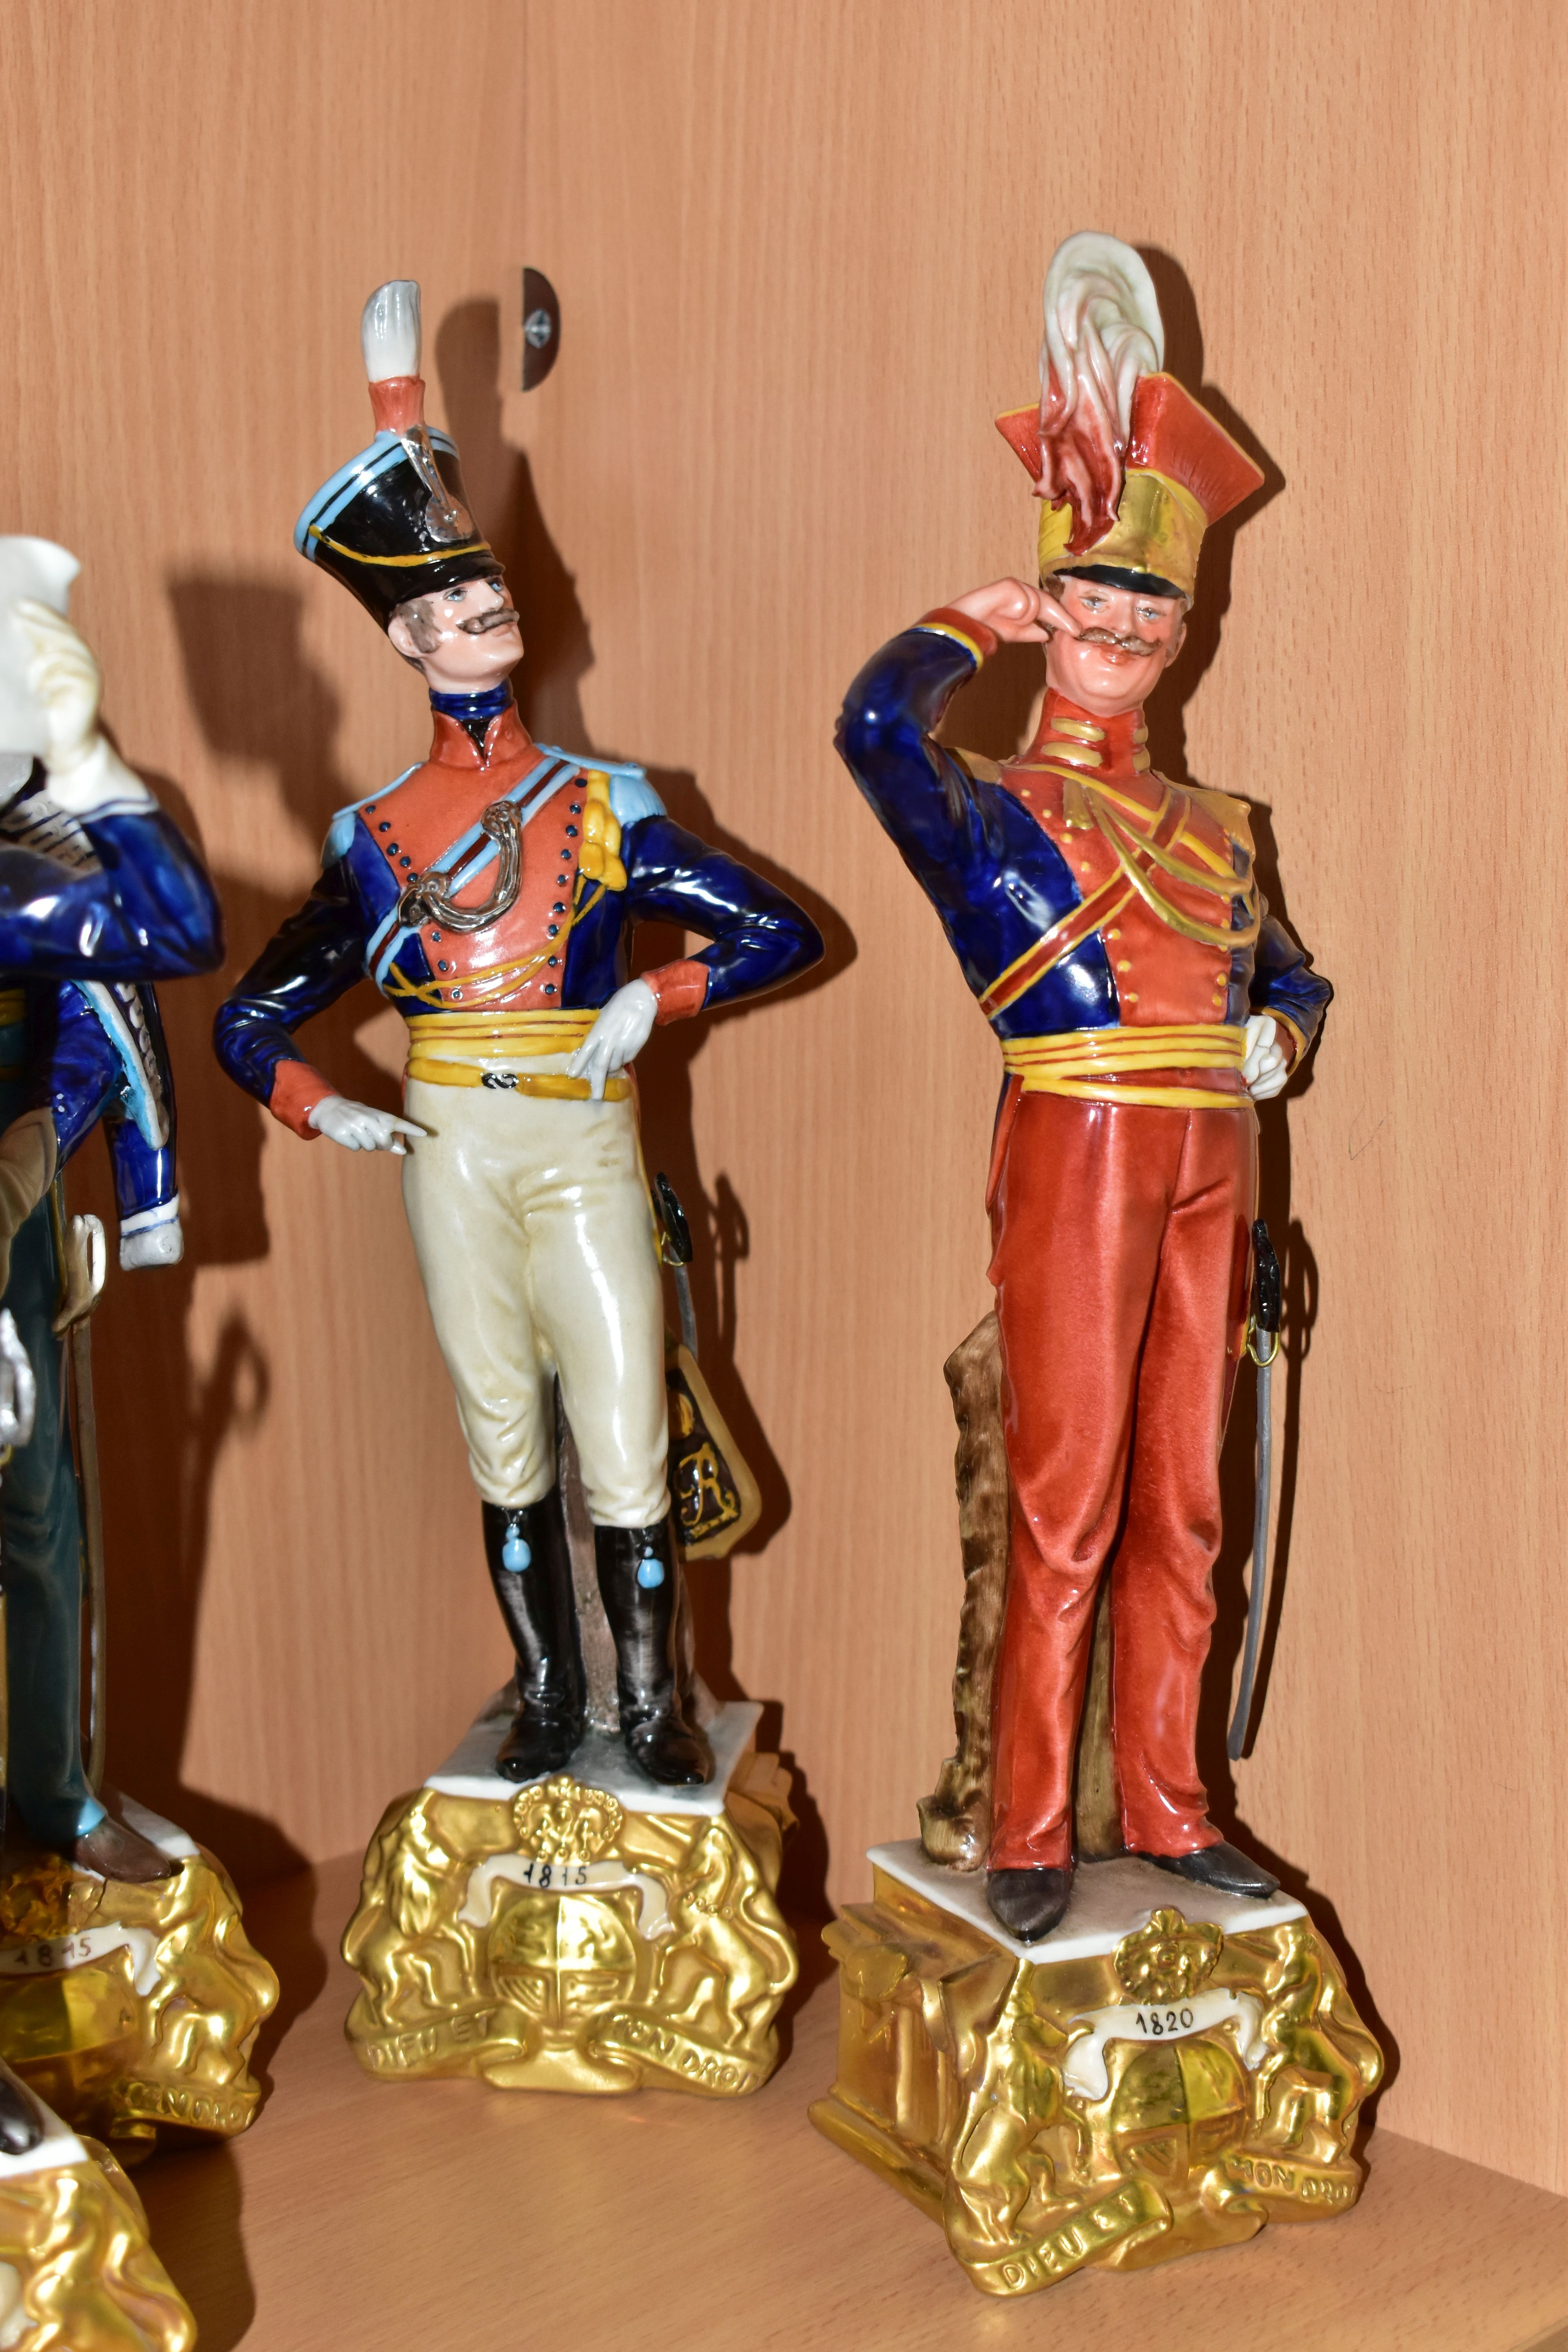 SIX CAPODIMONTE BRUNO MERLI FIGURES OF SOLDIERS IN HISTORICAL COSTUME OF 1798-1844 AND A GOEBEL - Image 2 of 5